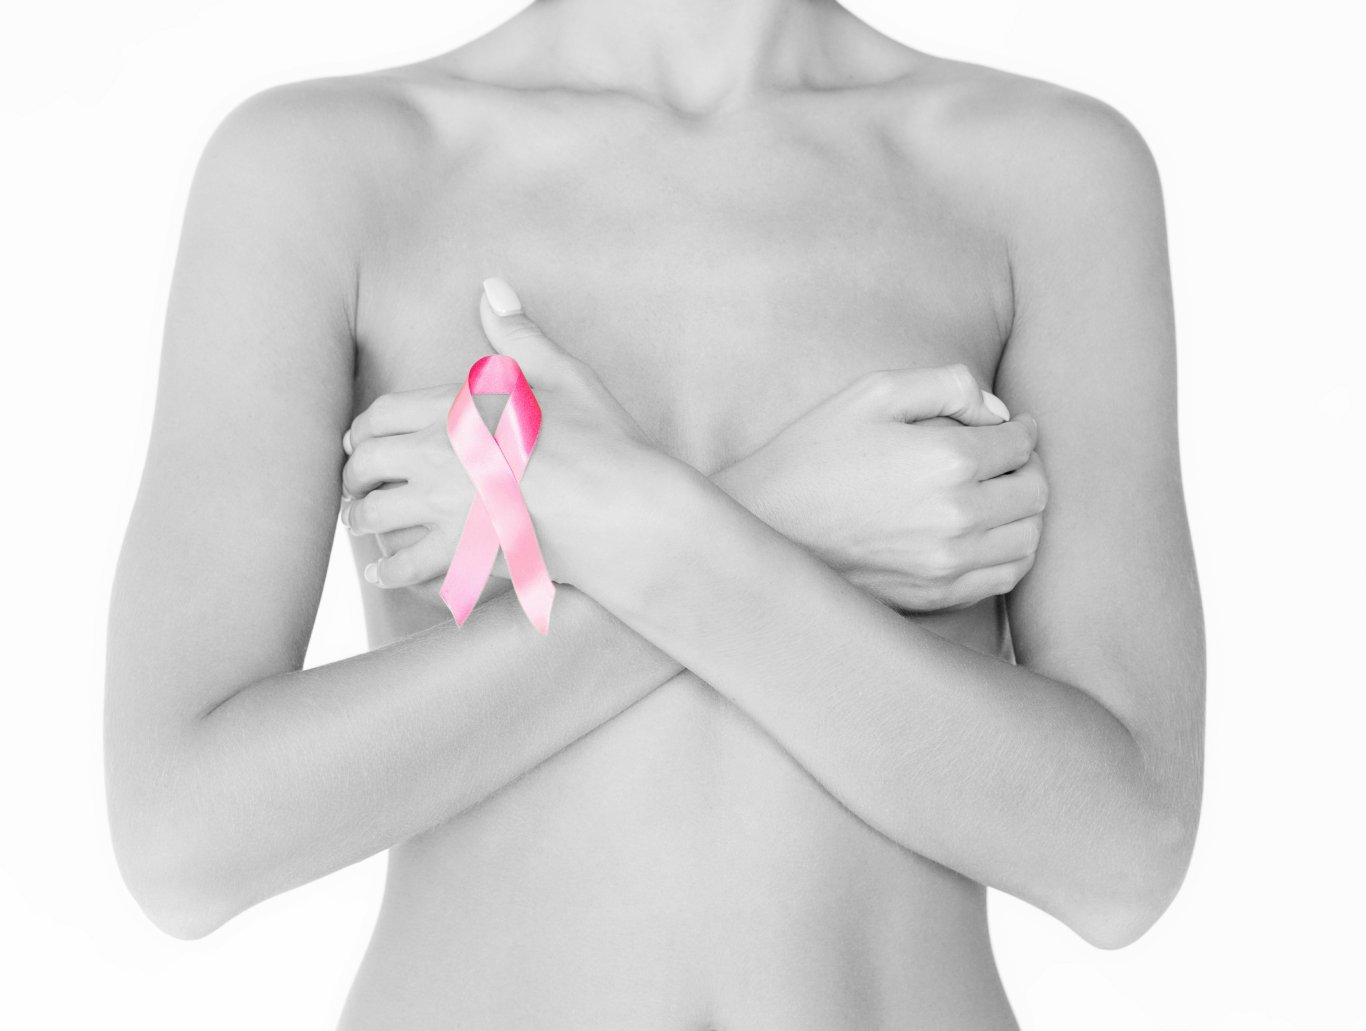 Breast Reconstruction Awareness (BRA) Day 2017 - Plastic and Reconstructive  Surgery - Western University